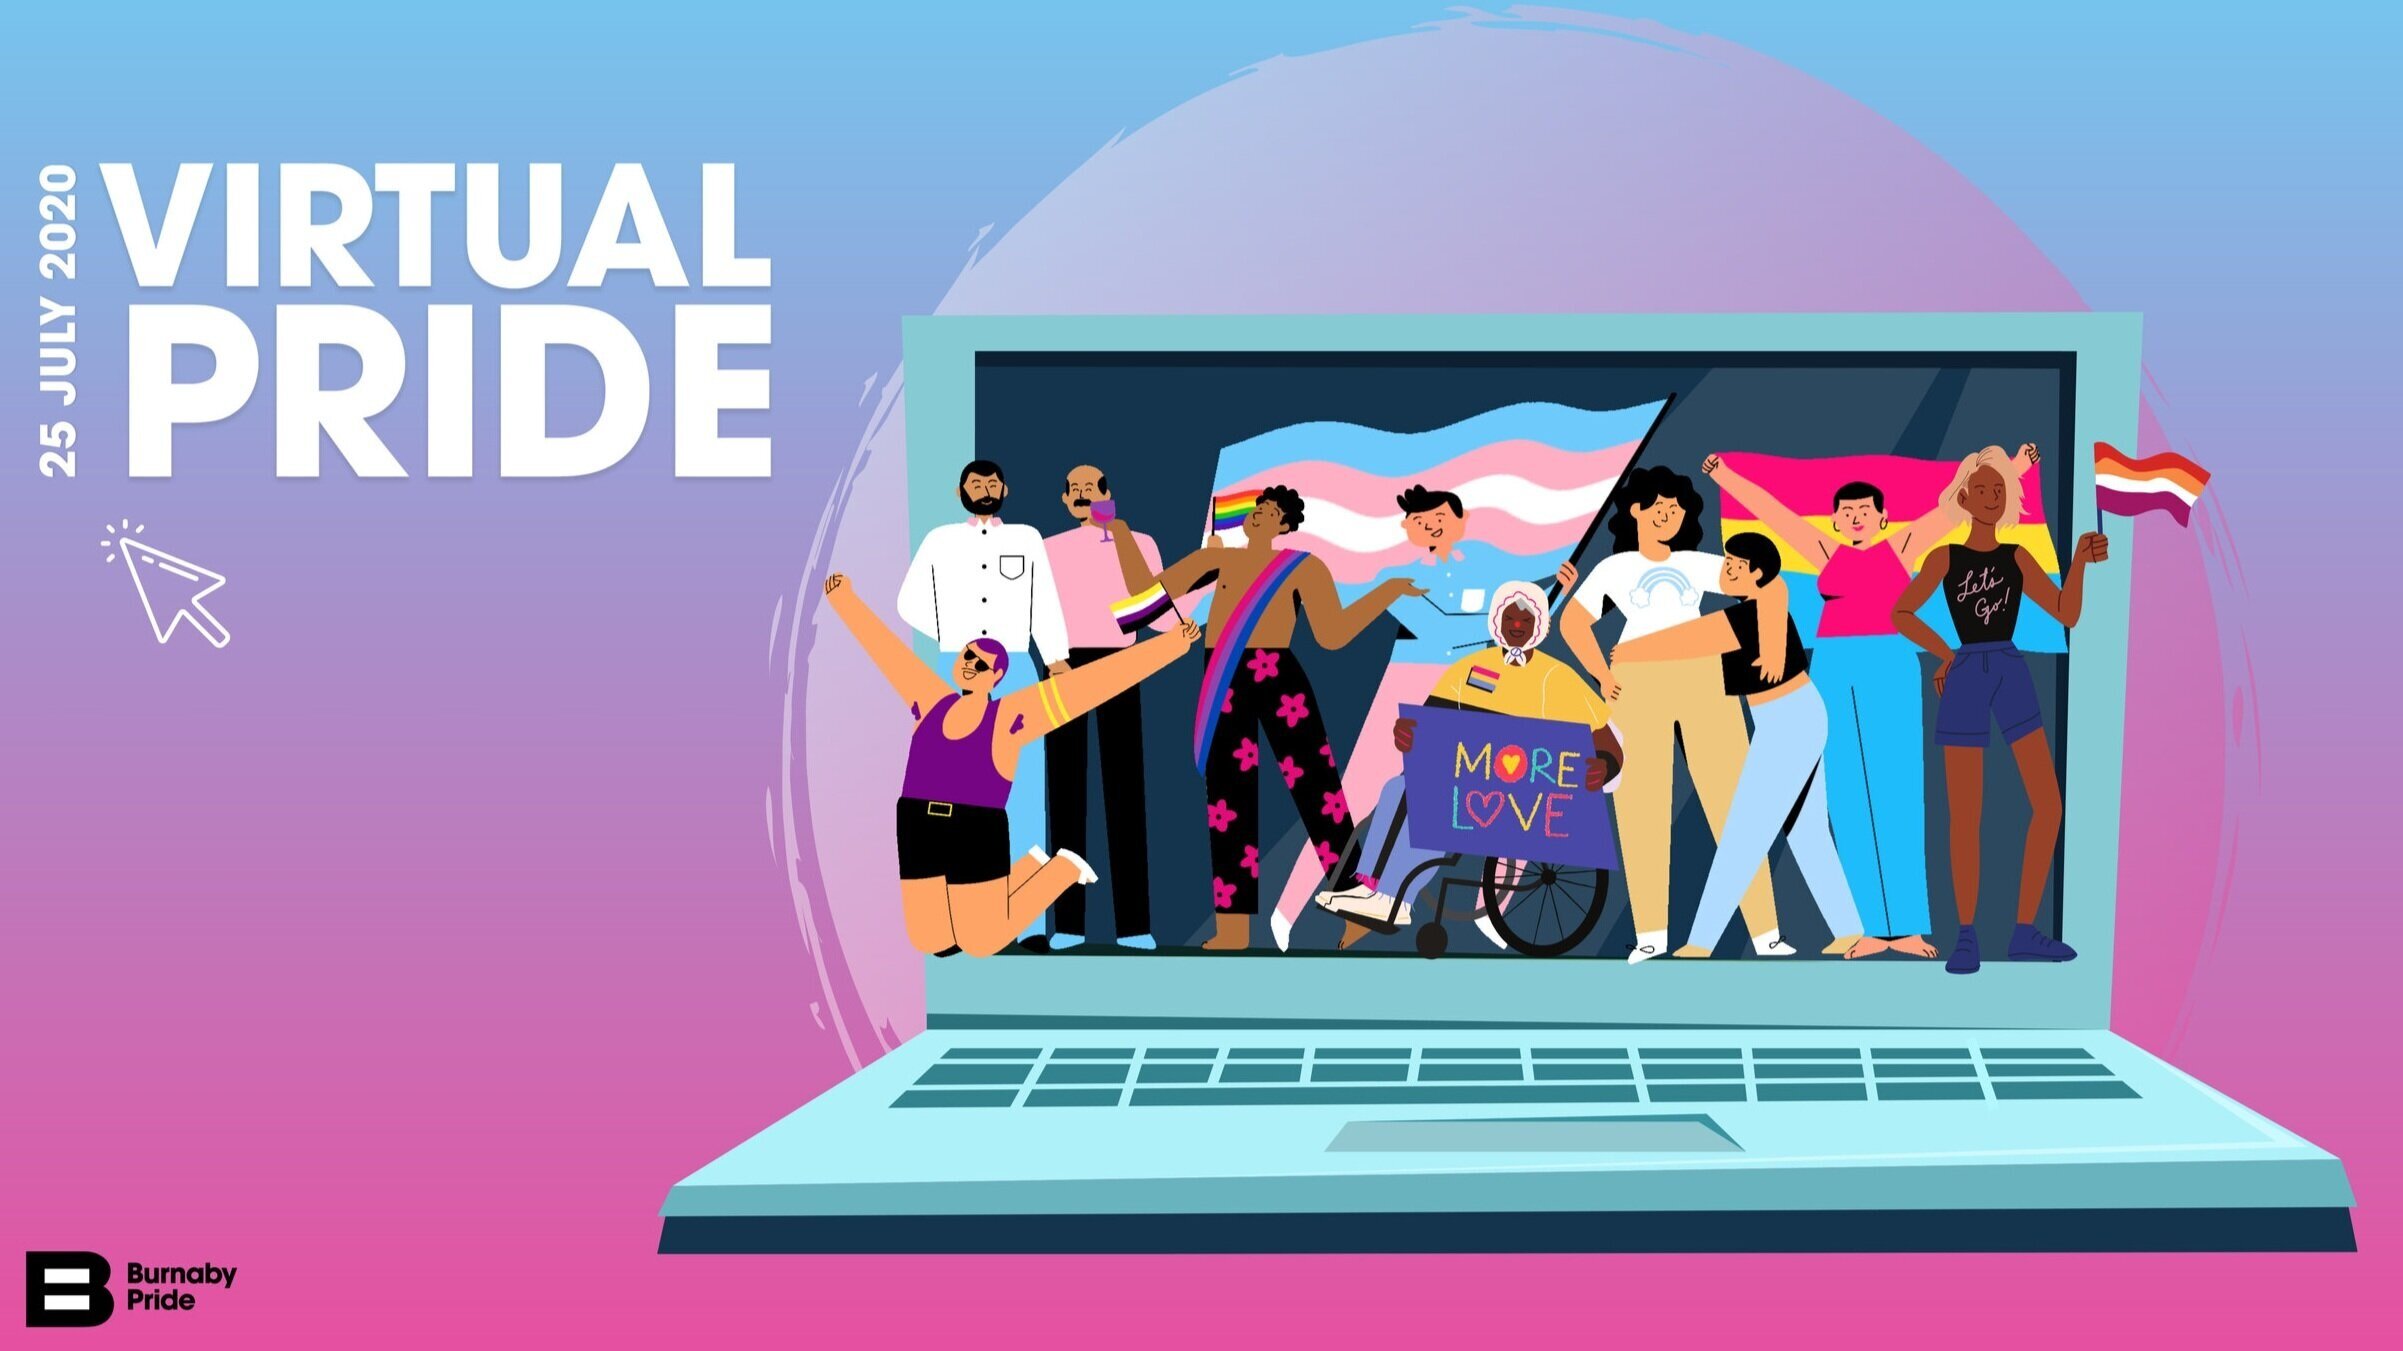 A pink and blue gradient background. On top there is a graphic of an open laptop, on the screen of the laptop there is diverse group of people, some in a celebratory pose, some hugging and some holding a Trans pride flag, a rainbow pride flag, a lesbian pride flag and a nonbinary pride flag, one person with a wheelchair is holding a sign that reads “More Love”. Text to the left of the laptop graphic reads “ Virtual Pride, 25 July 2020, 6PM-9PM”